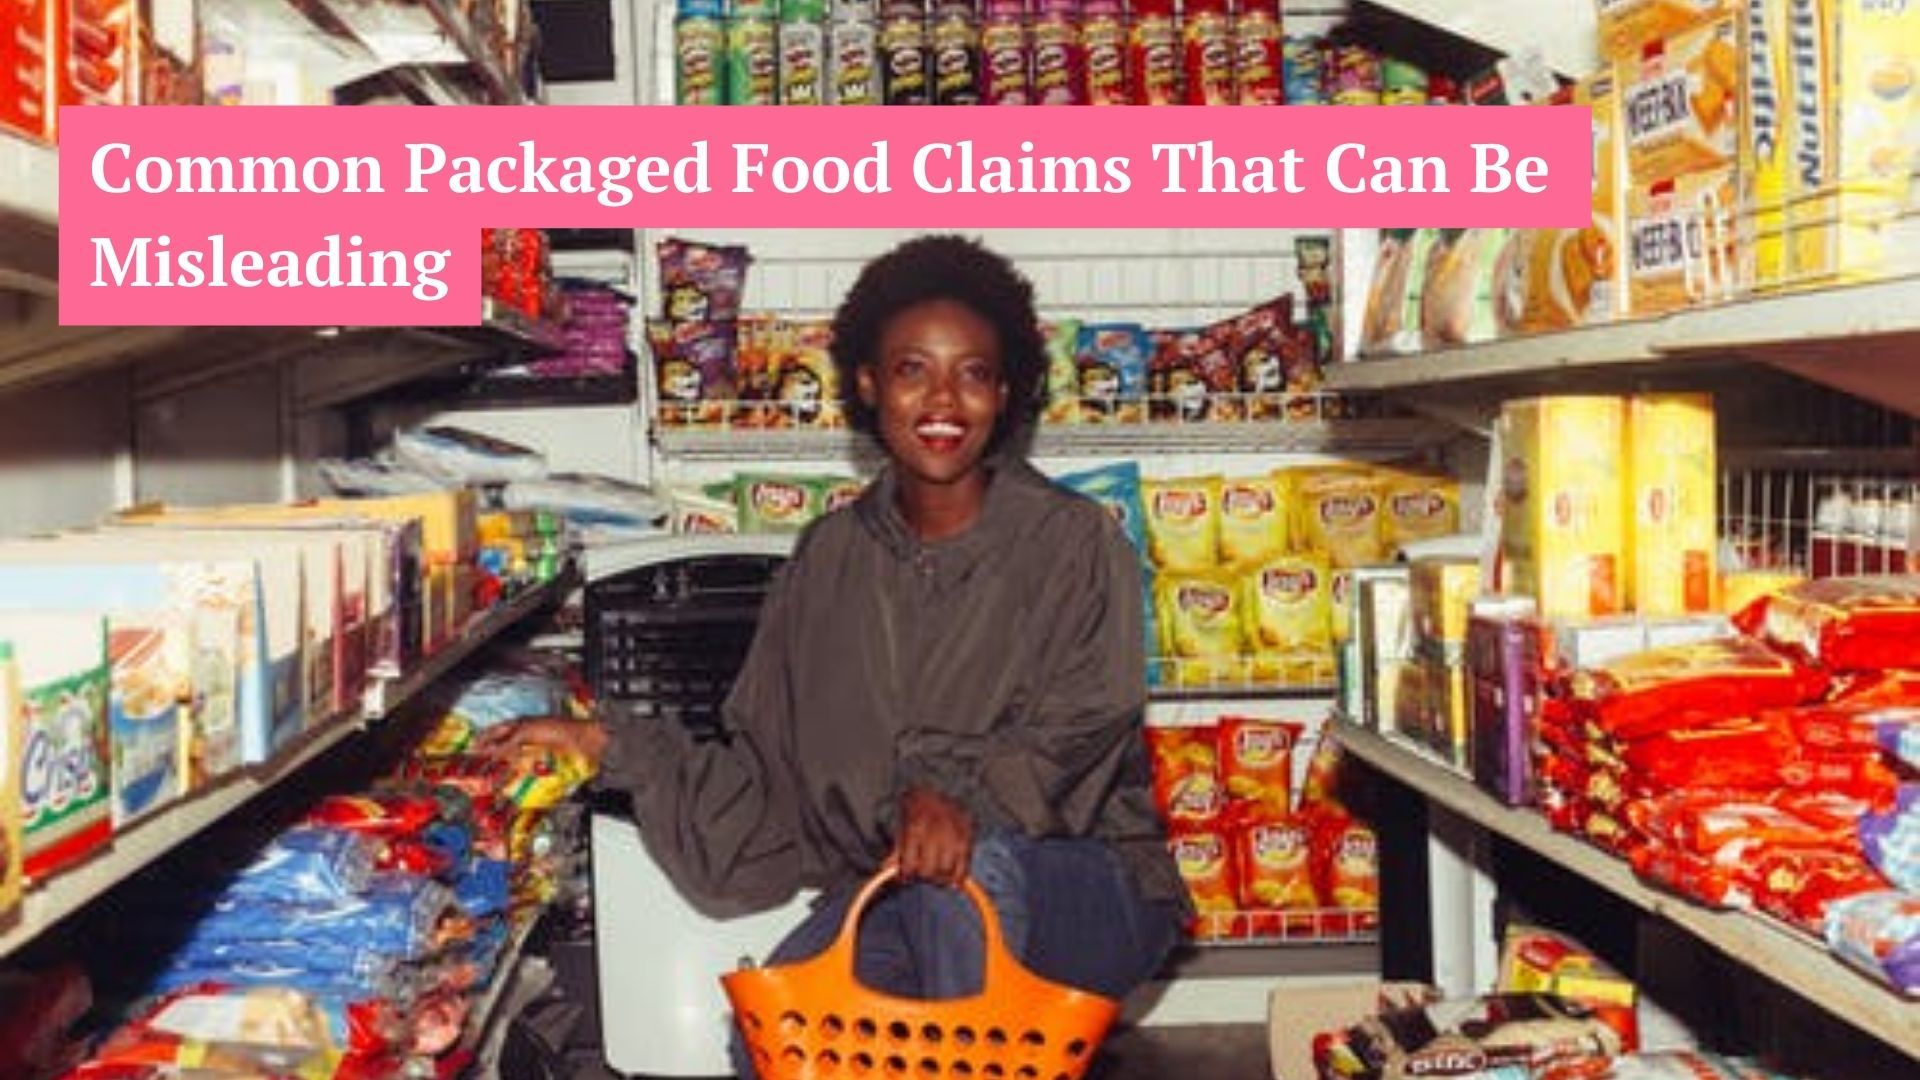 Common Packaged Food Claims That Can Be Misleading